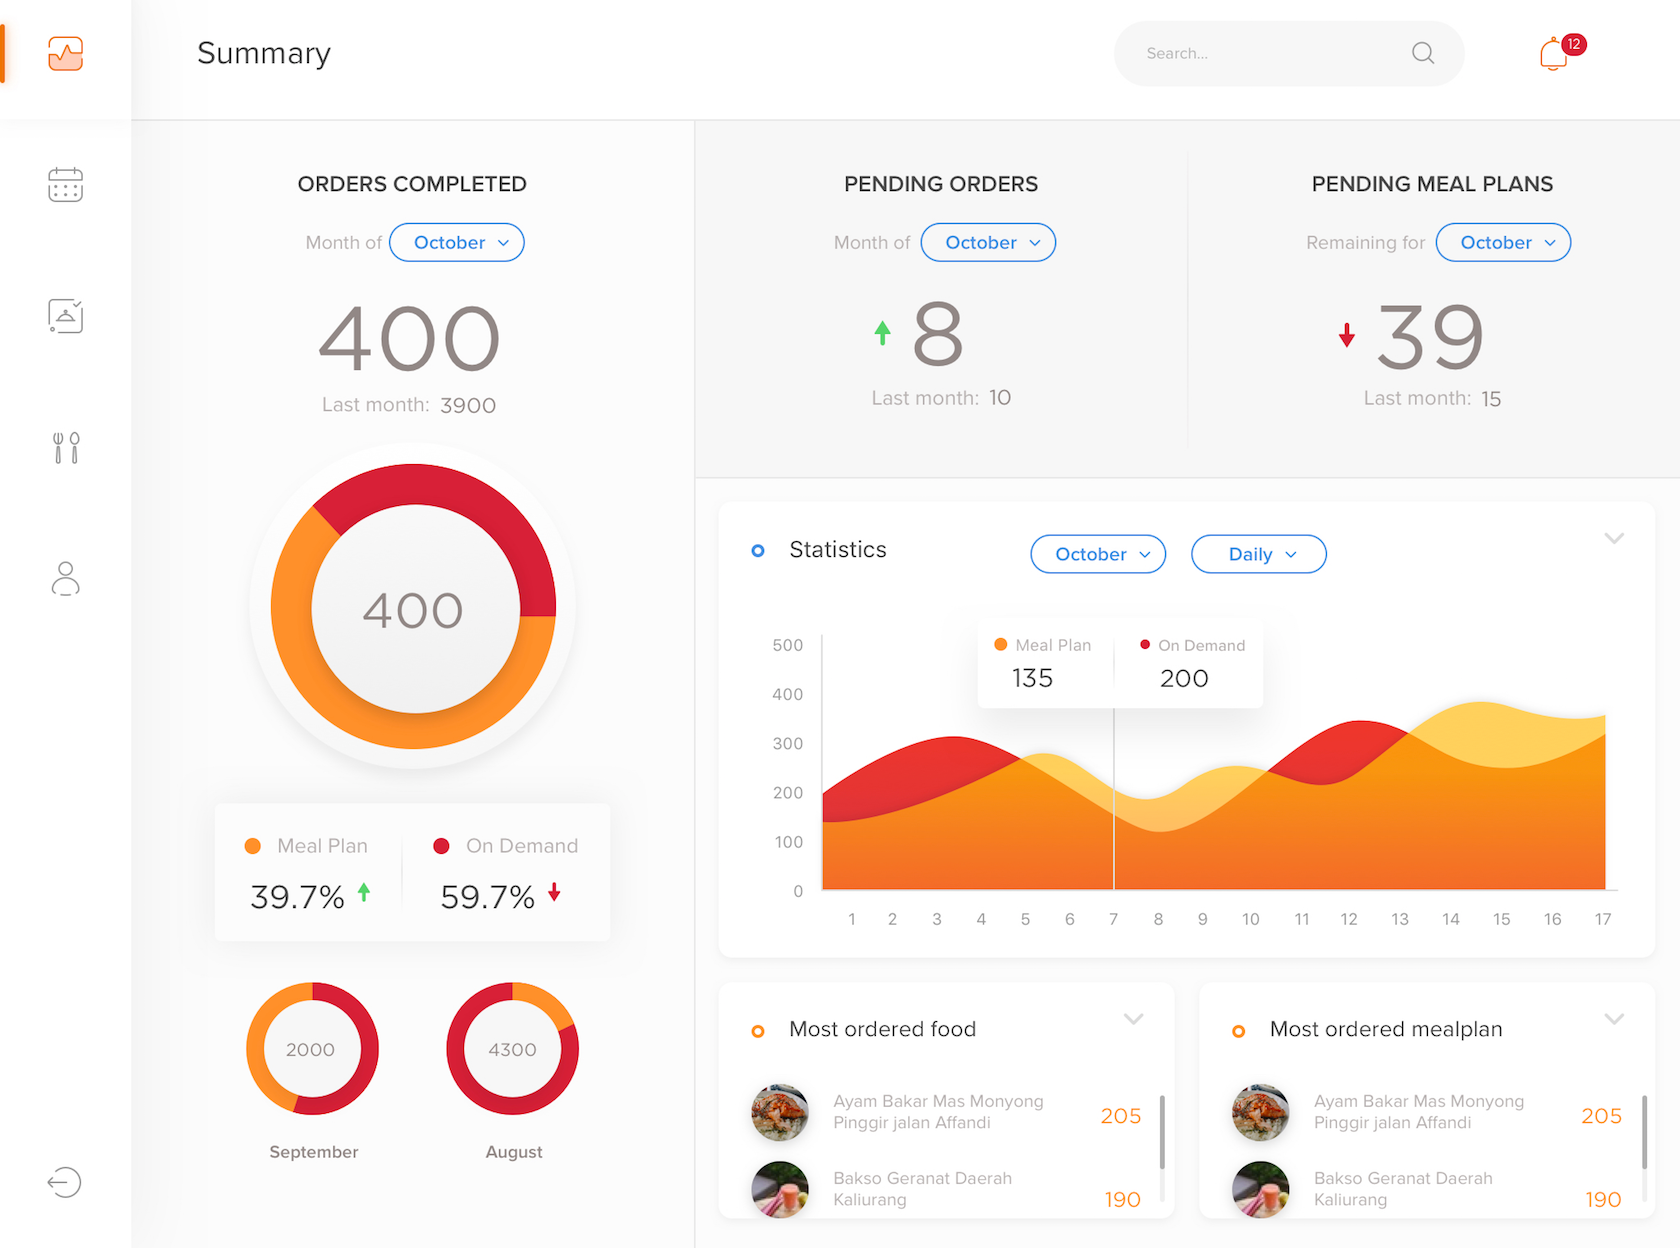 Presenting data visually can make dashboards easier to understand.